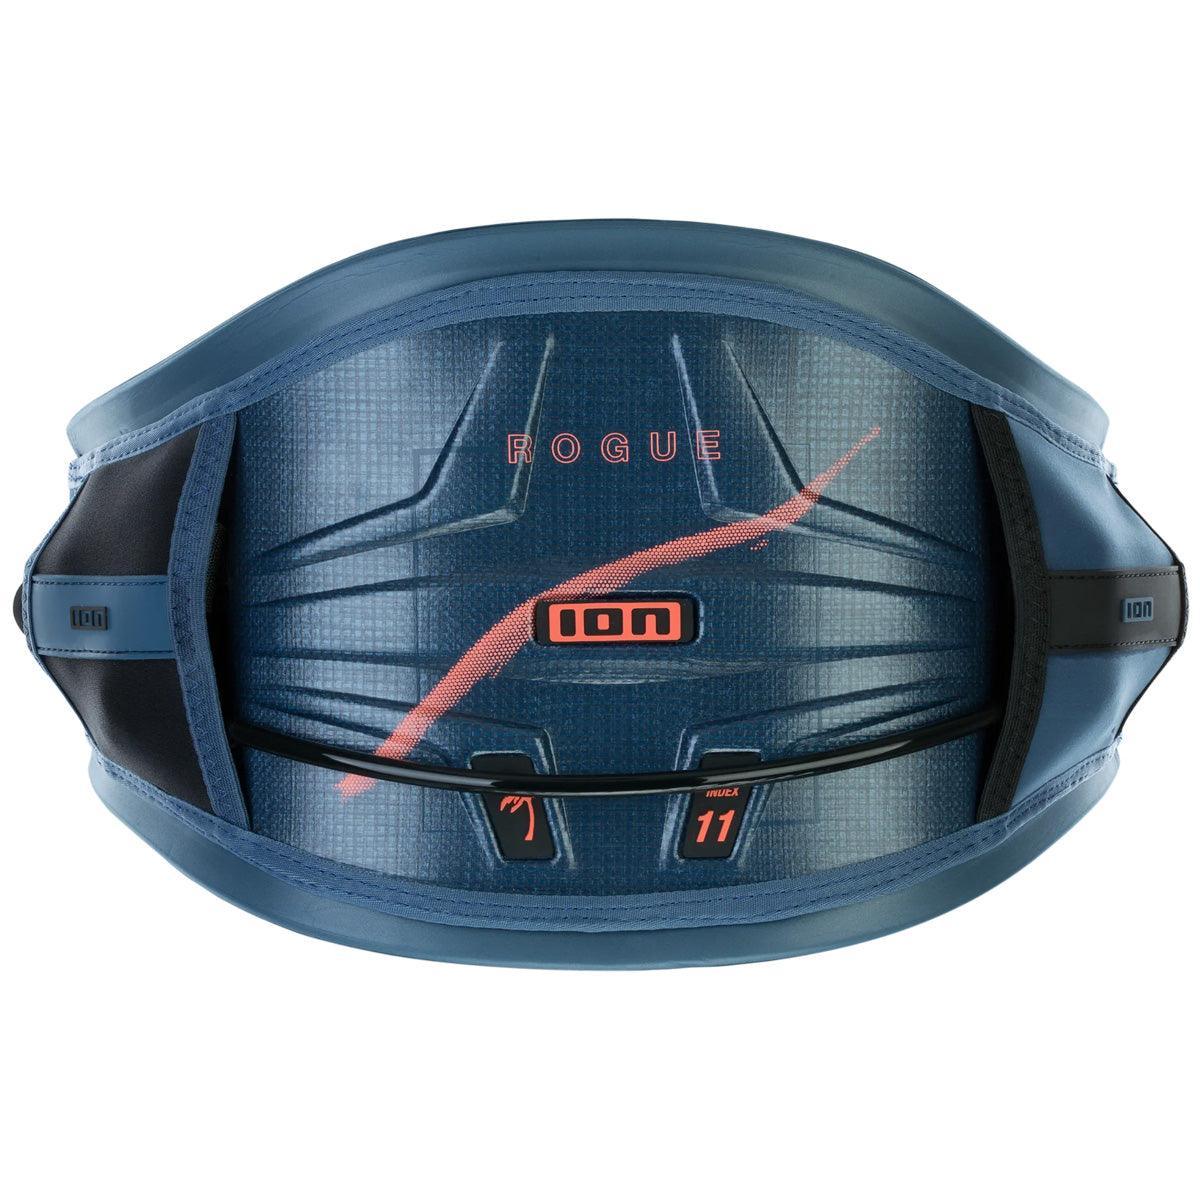 ION Rogue Foil Wing Harness - Powerkiteshop